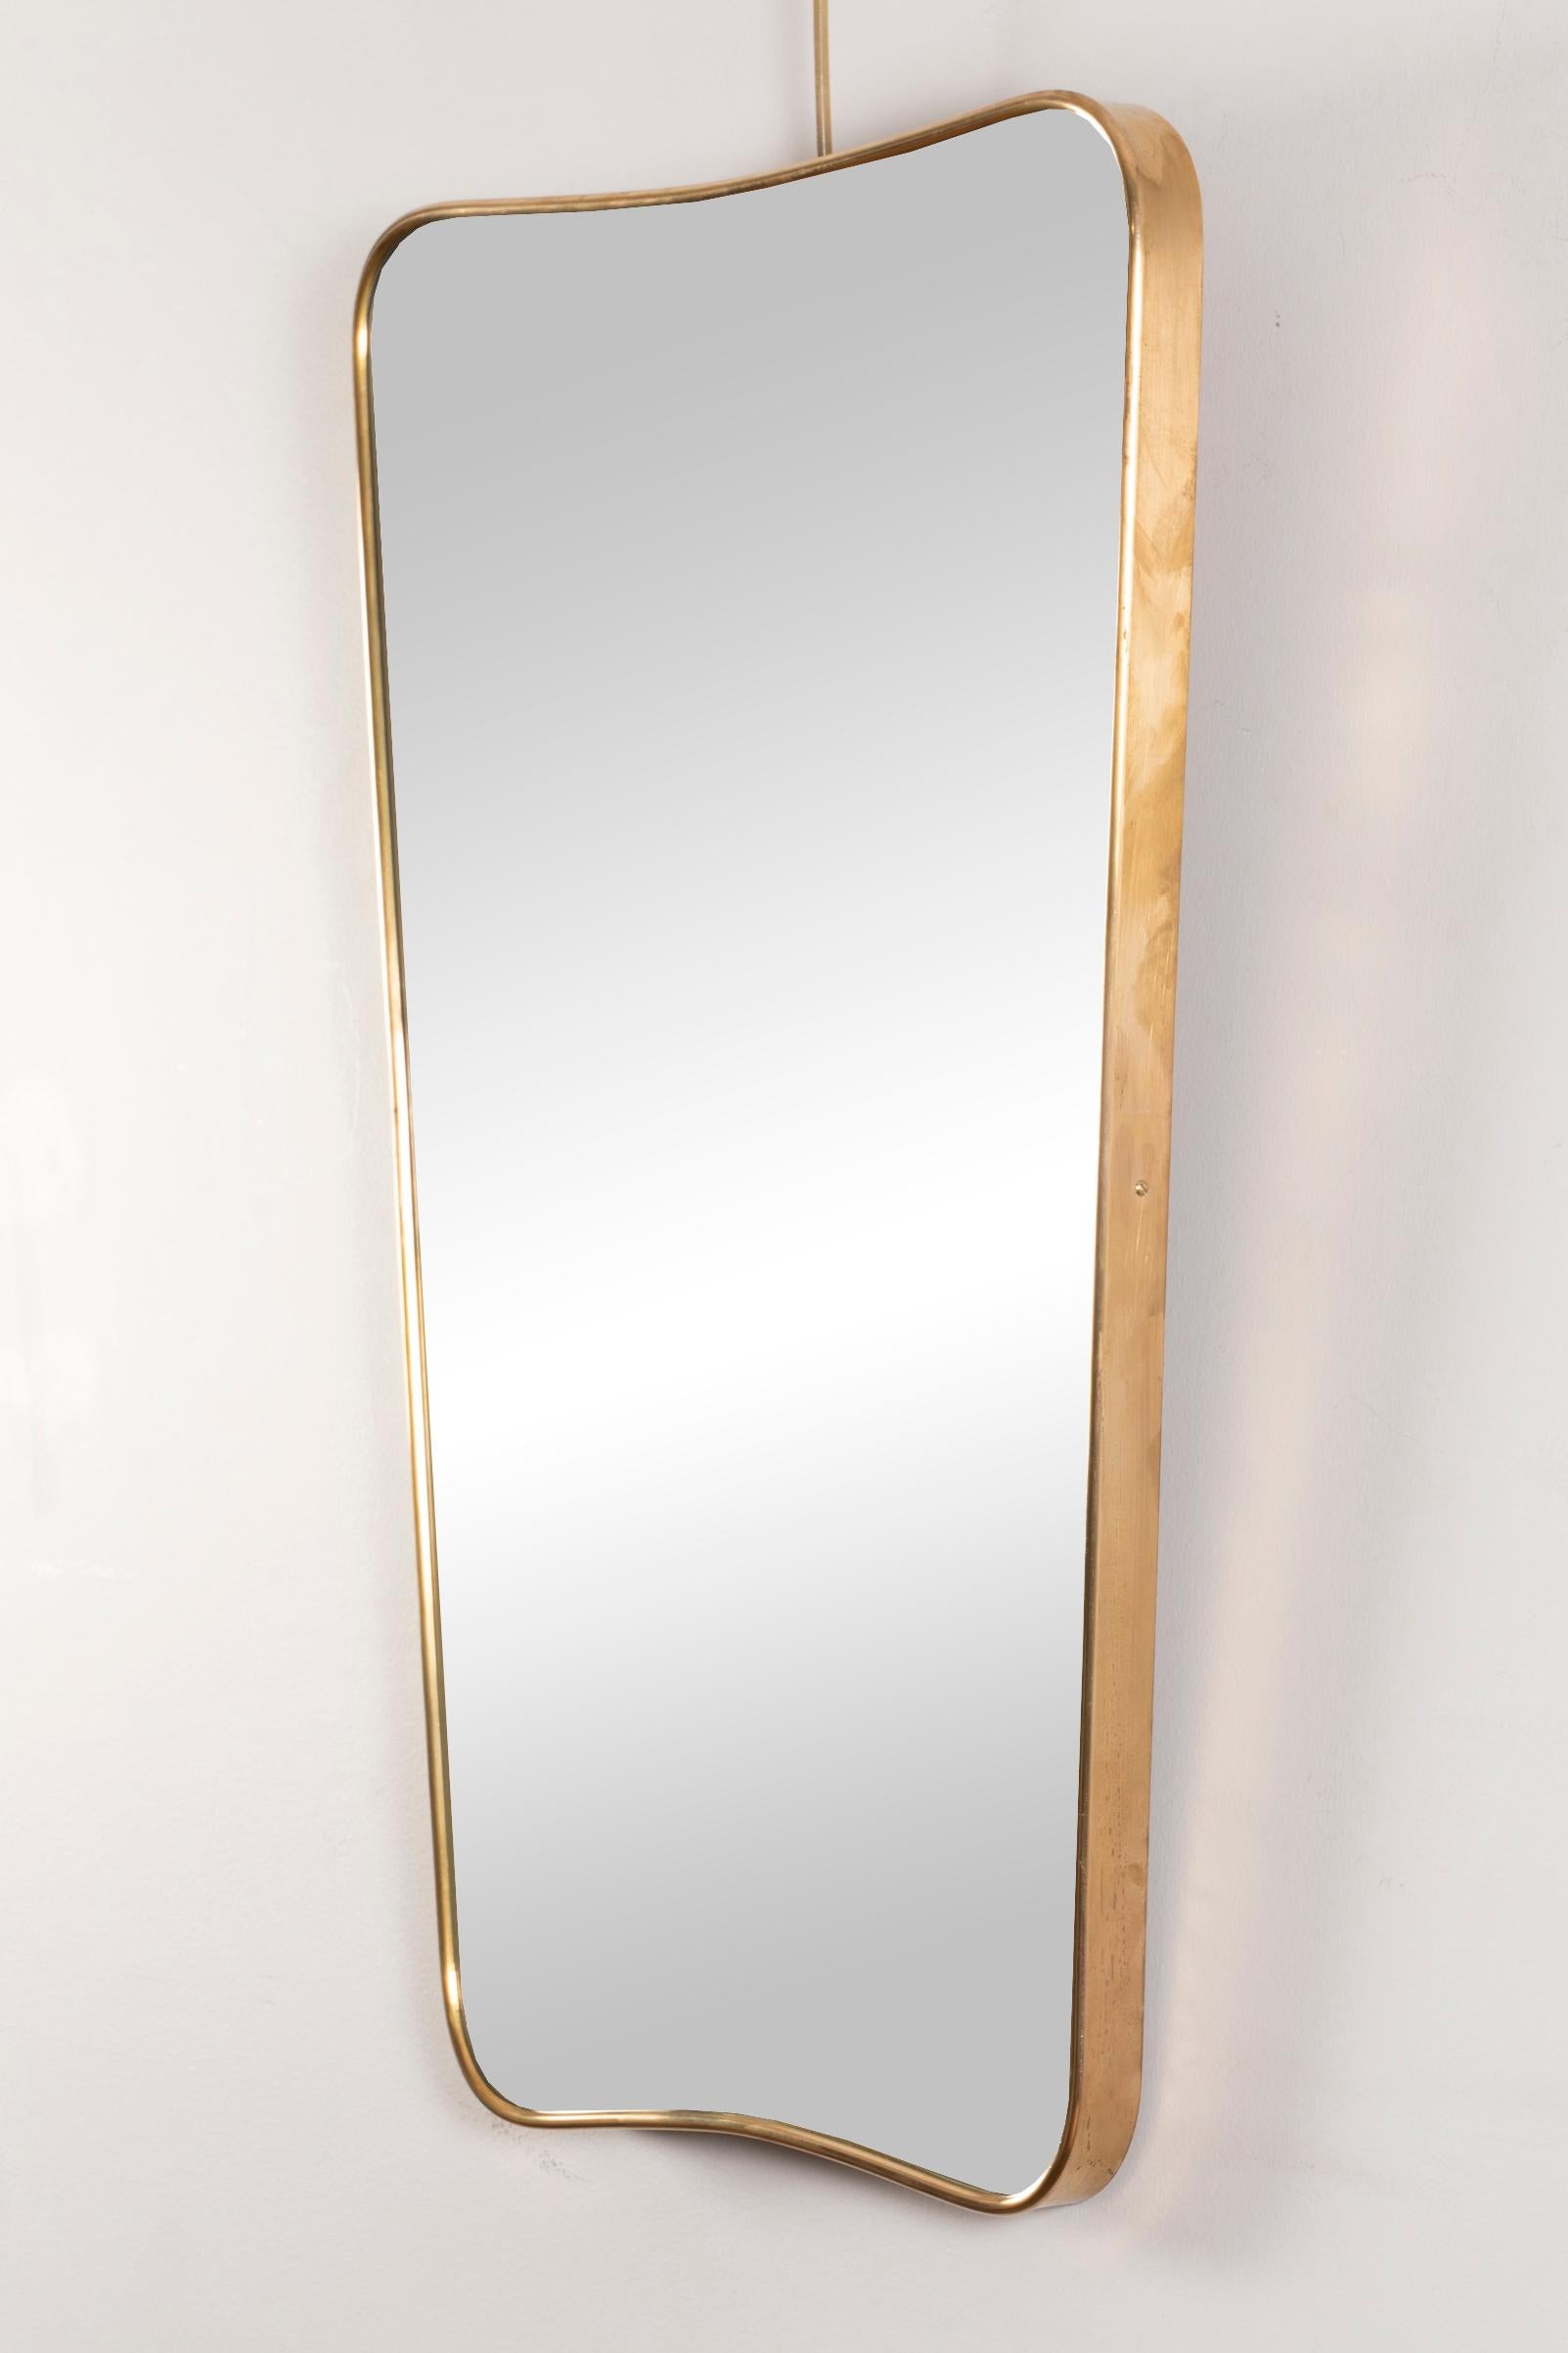 Wall mirror, brass frame, 
in the style of Gio Ponti, 
Italy, circa 1955. 

Measures: H 72 cm (28.3 in.) 
W 46 cm (18.1 in.)
D 3 cm (1.18 in.)